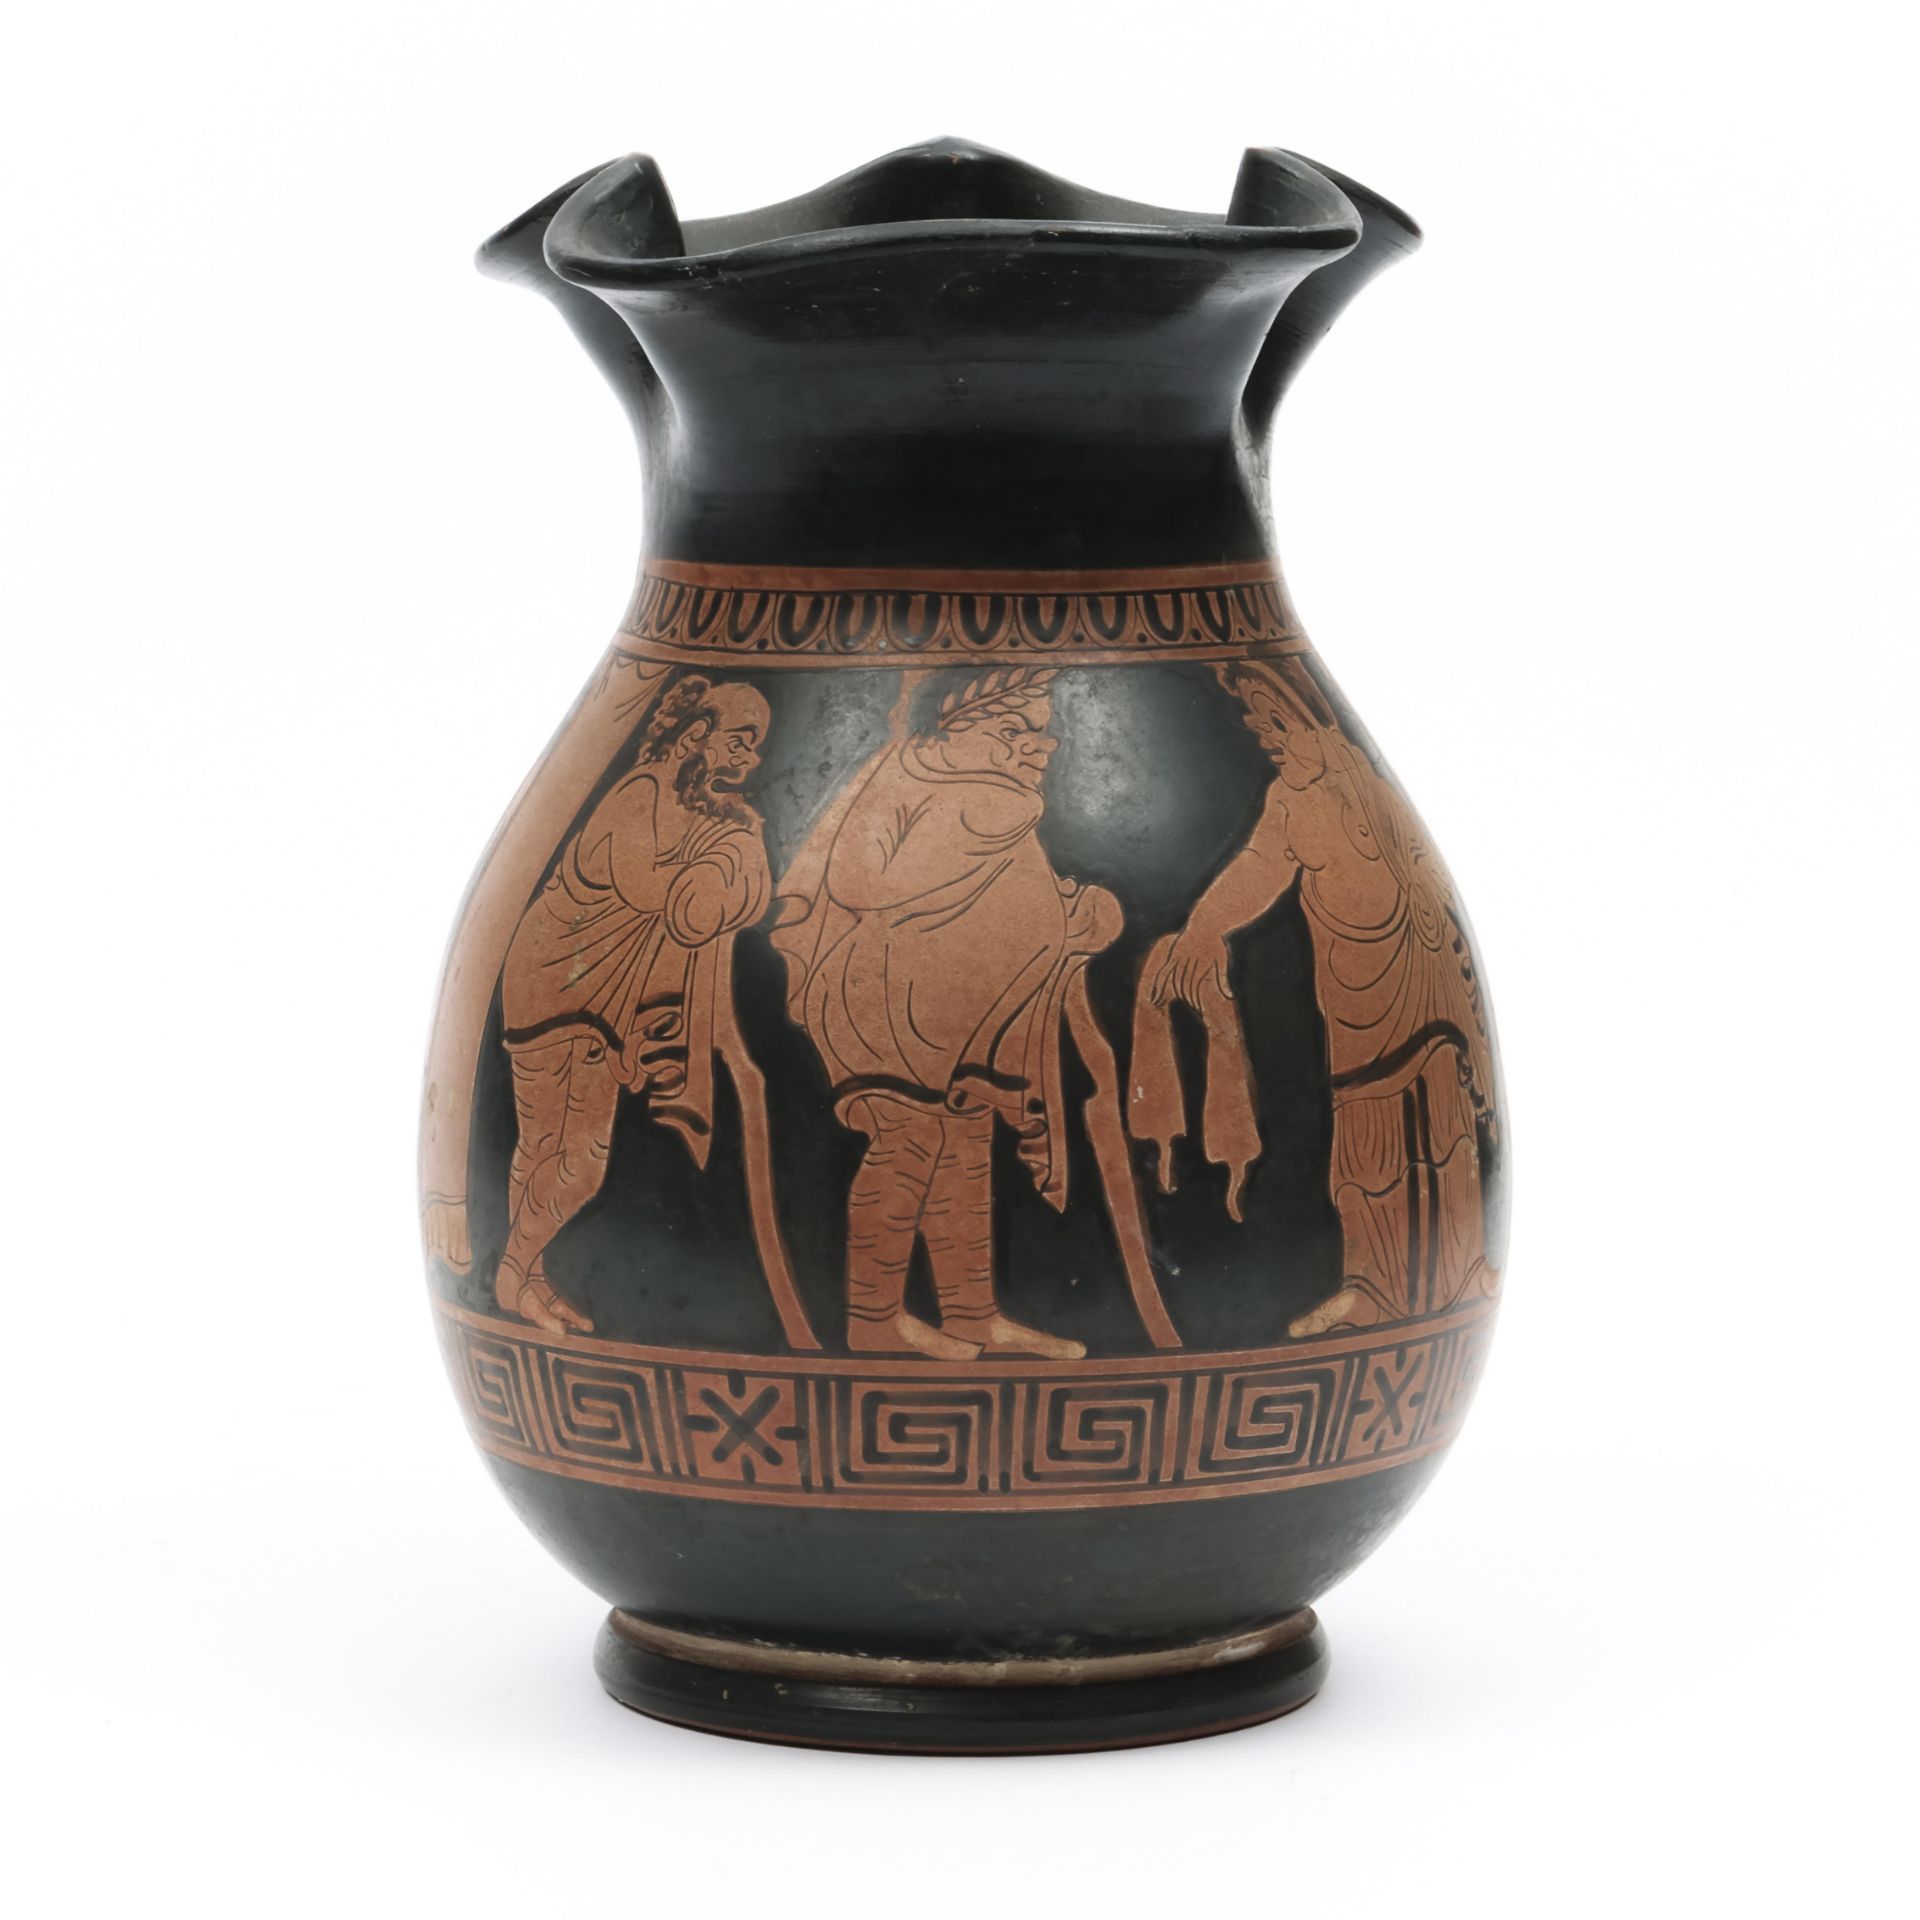 South Italy, a terracotta red-figure vase, oenocheo, in the style of the 4th century BC,